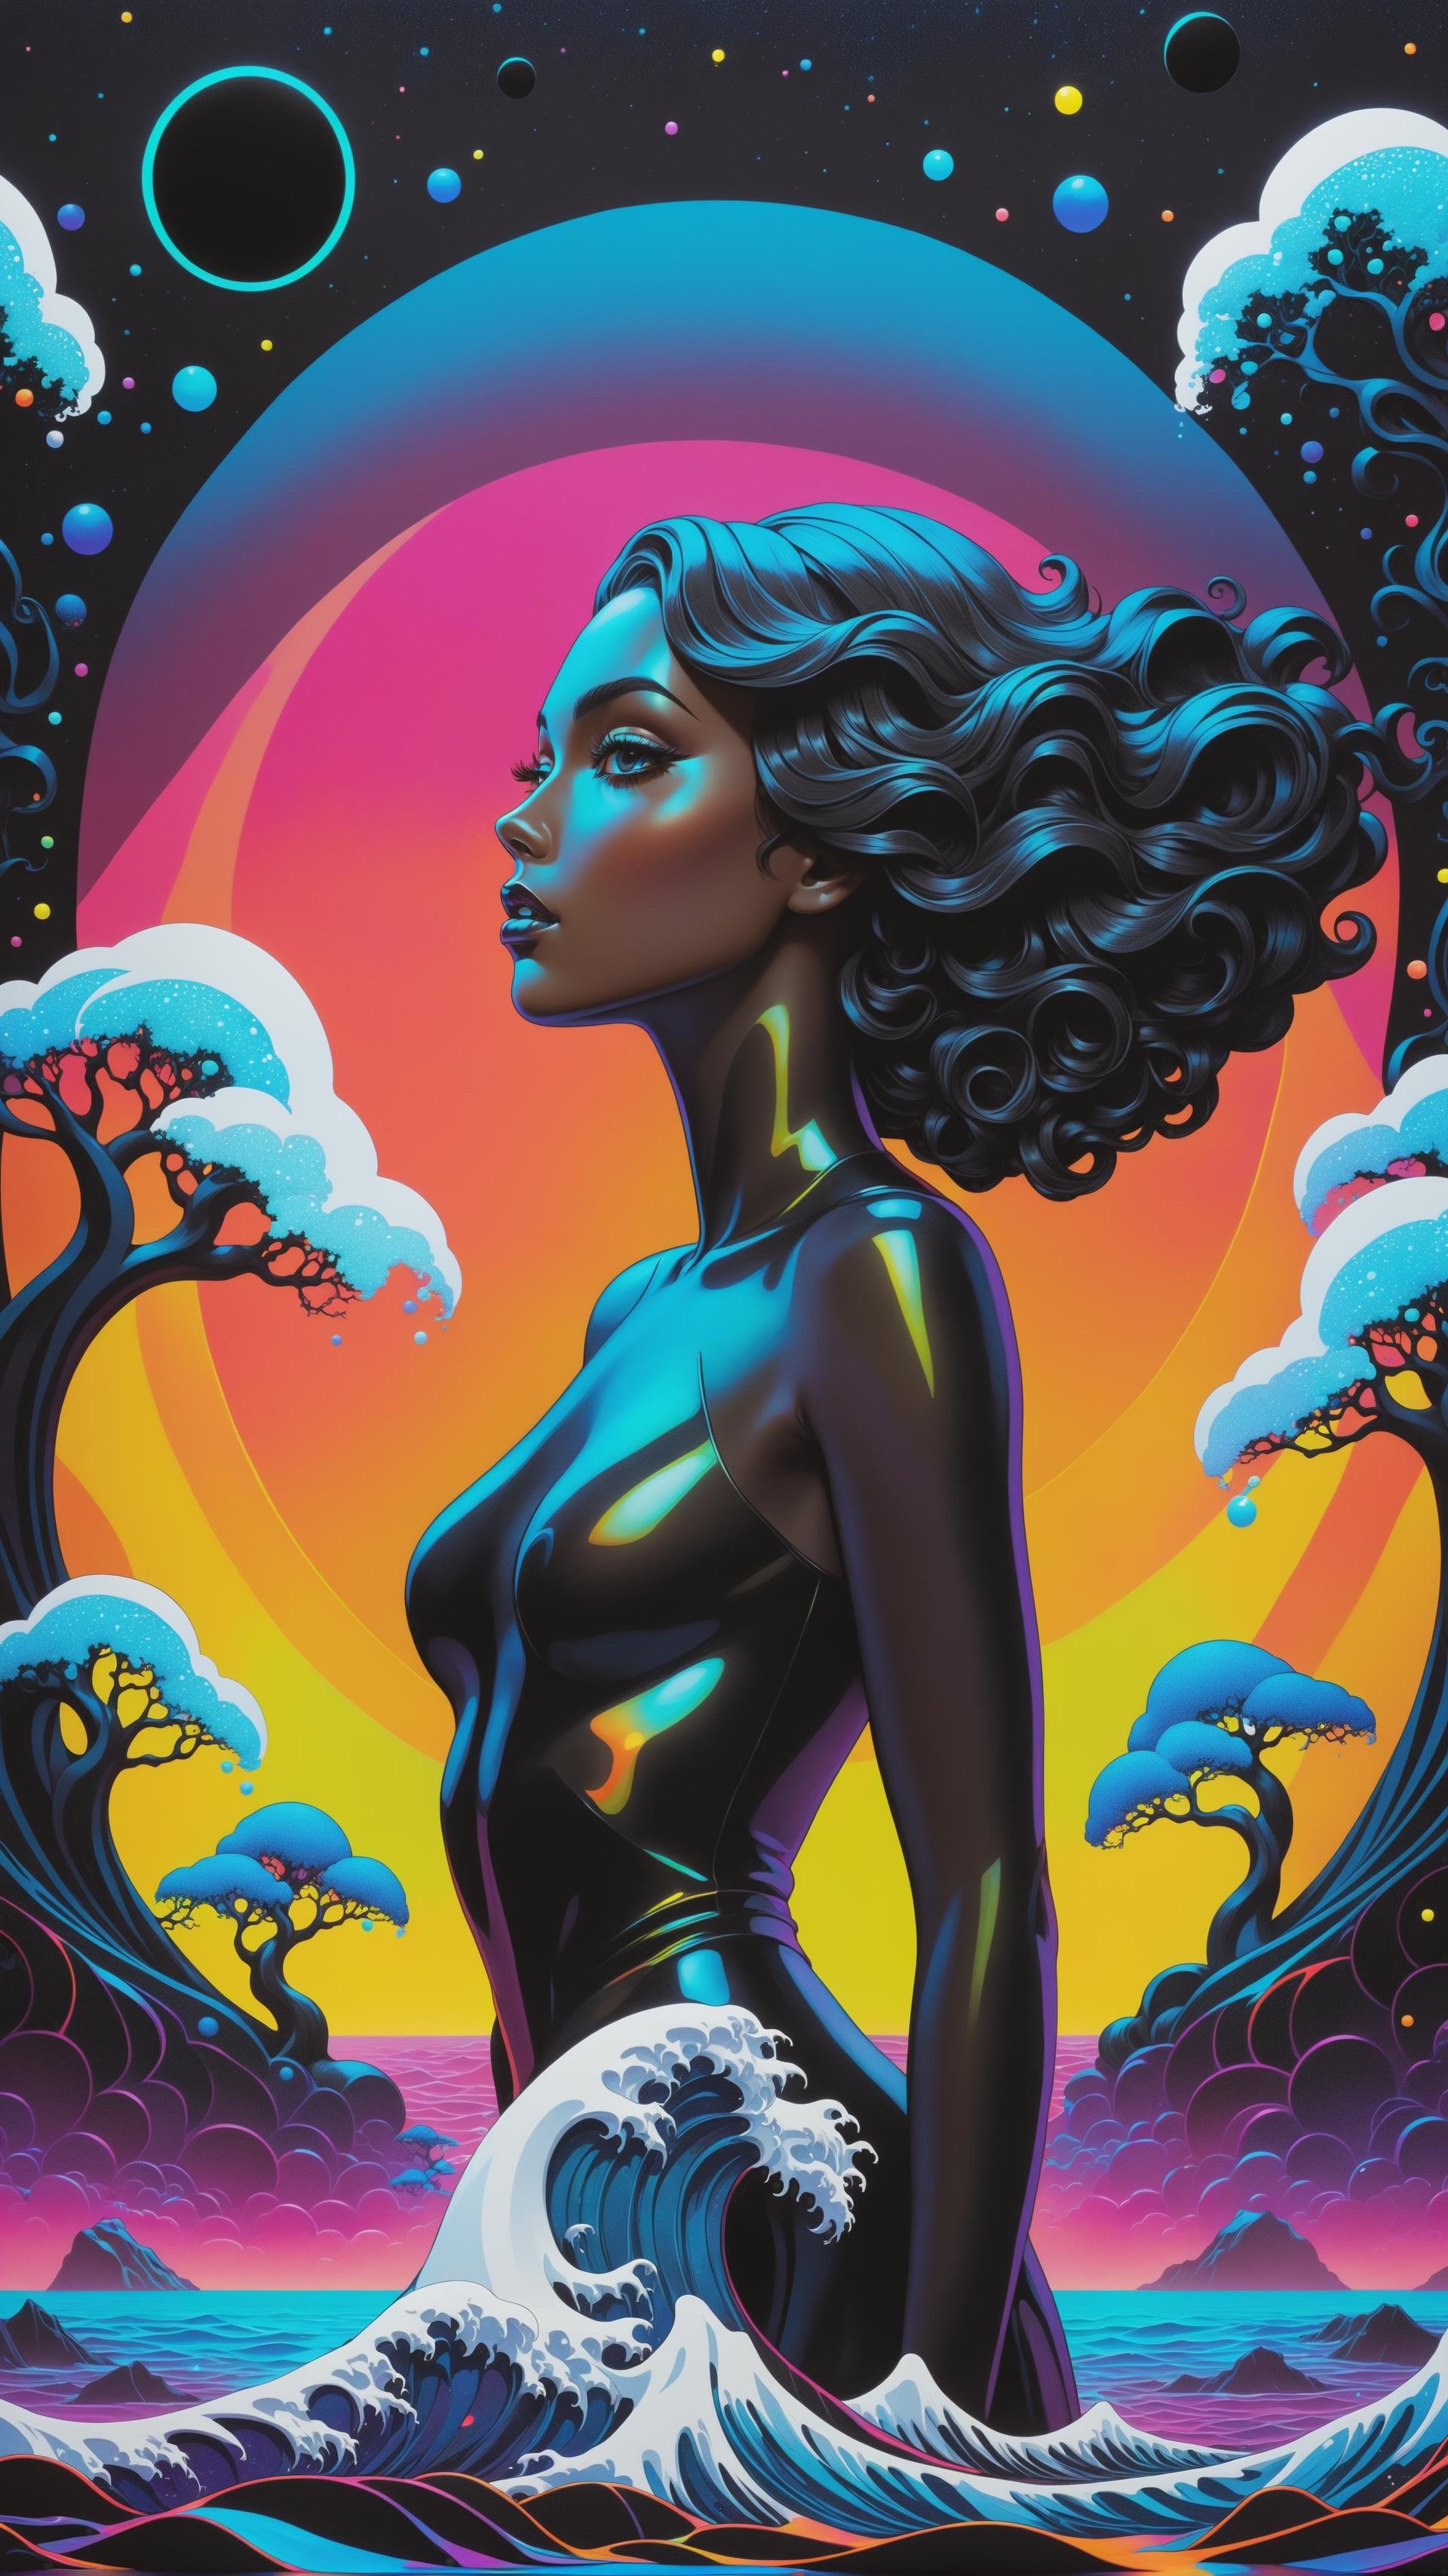 in the style of artgerm, comic style,3D model, mythical seascape, negative space, space quixotic dreams, temporal hallucination, psychedelic, mystical, intricate details, very bright neon colors, (vantablack background:1.5), pointillism, pareidolia, melting, symbolism, very high contrast, chiaroscuro